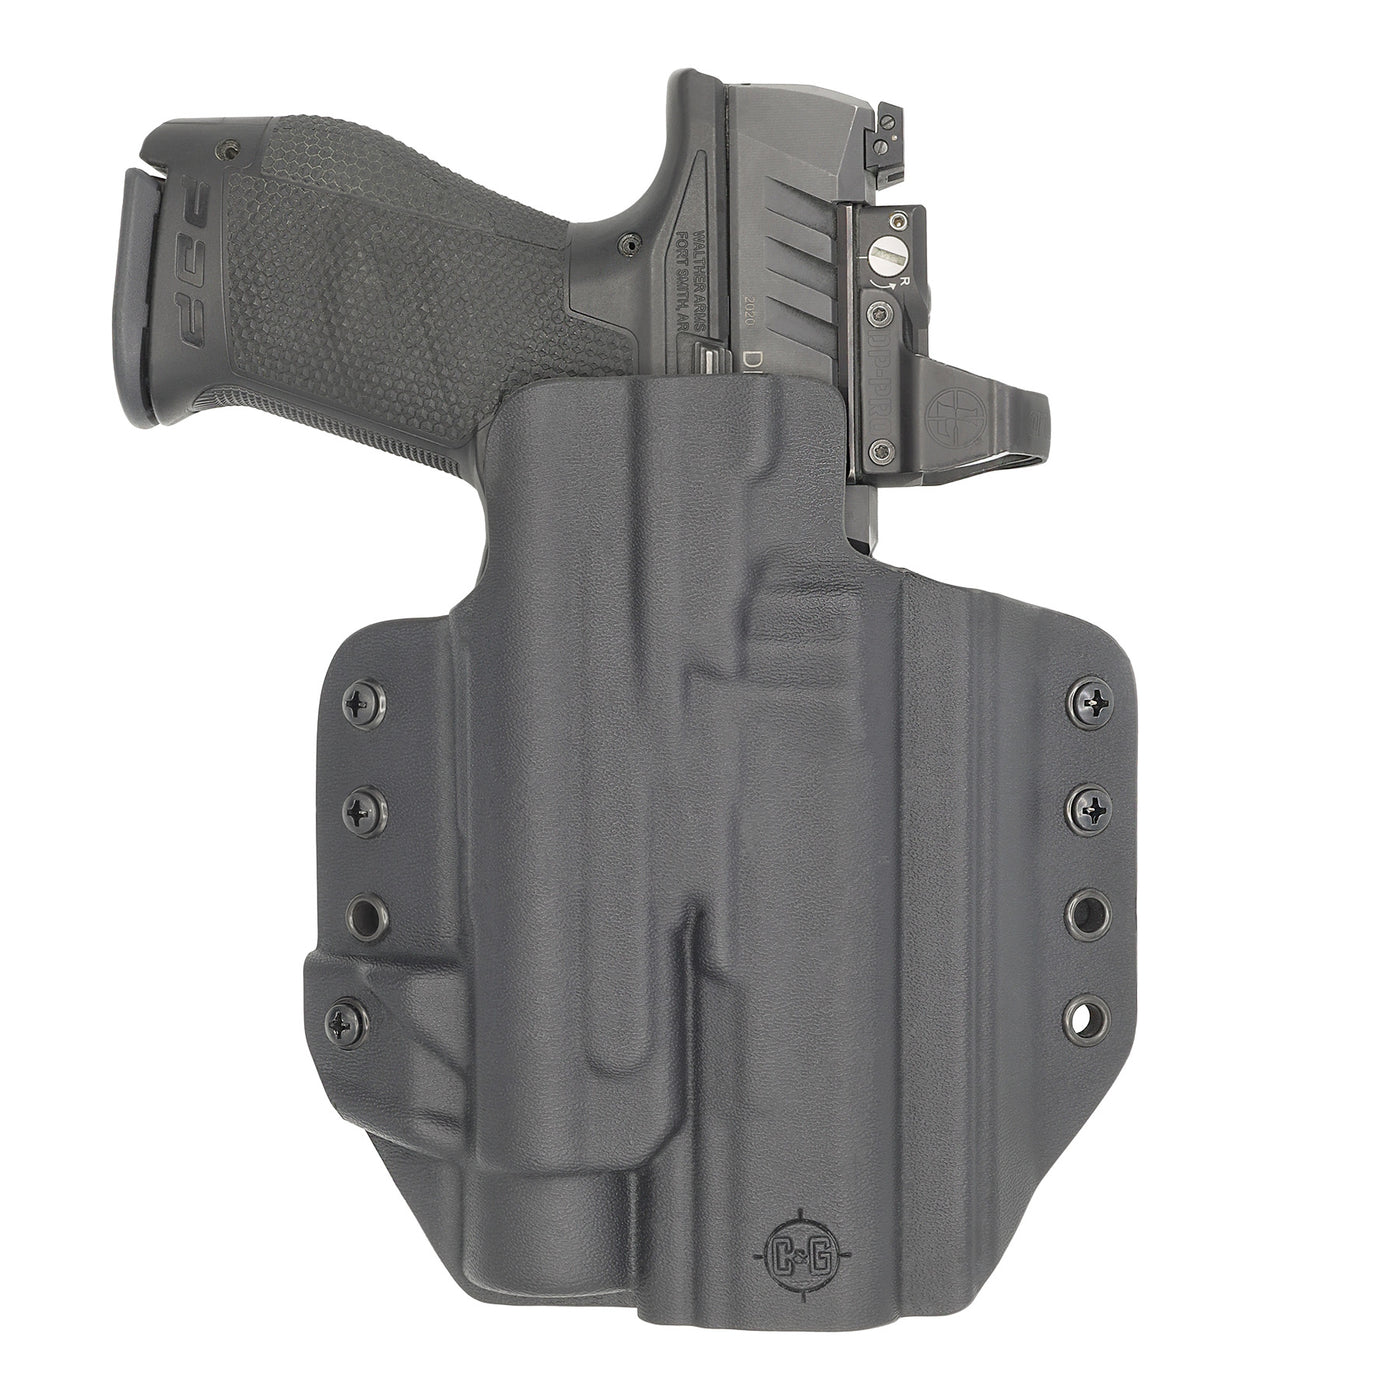 C&G Holsters Custom OWB Tactical FN 509 Streamlight TLR1 in holstered position